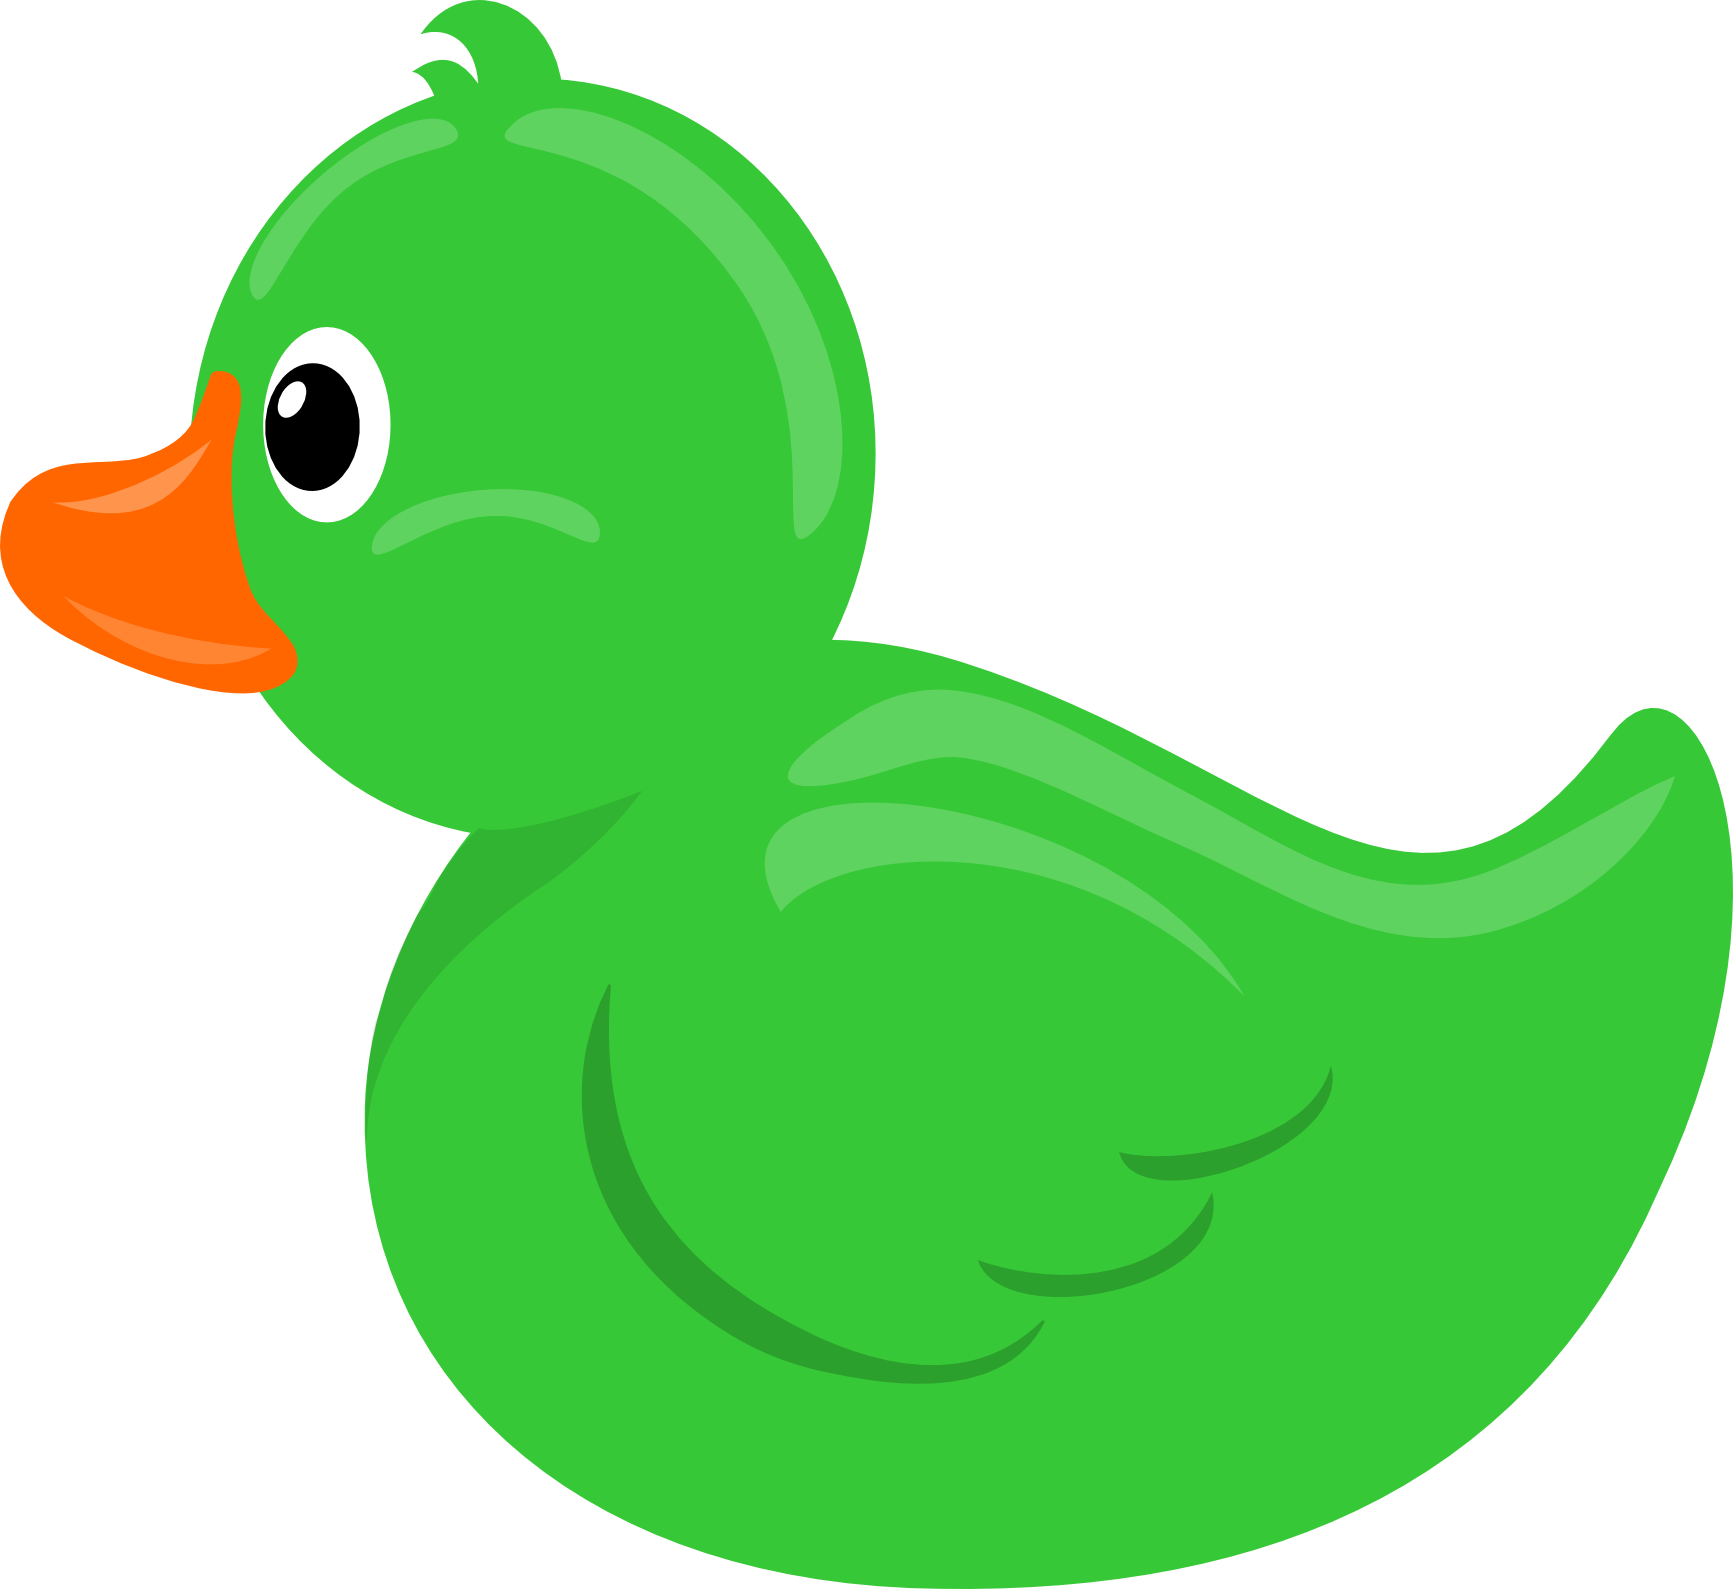 Ducks clipart beautiful, Ducks beautiful Transparent FREE for download on WebStockReview 2020